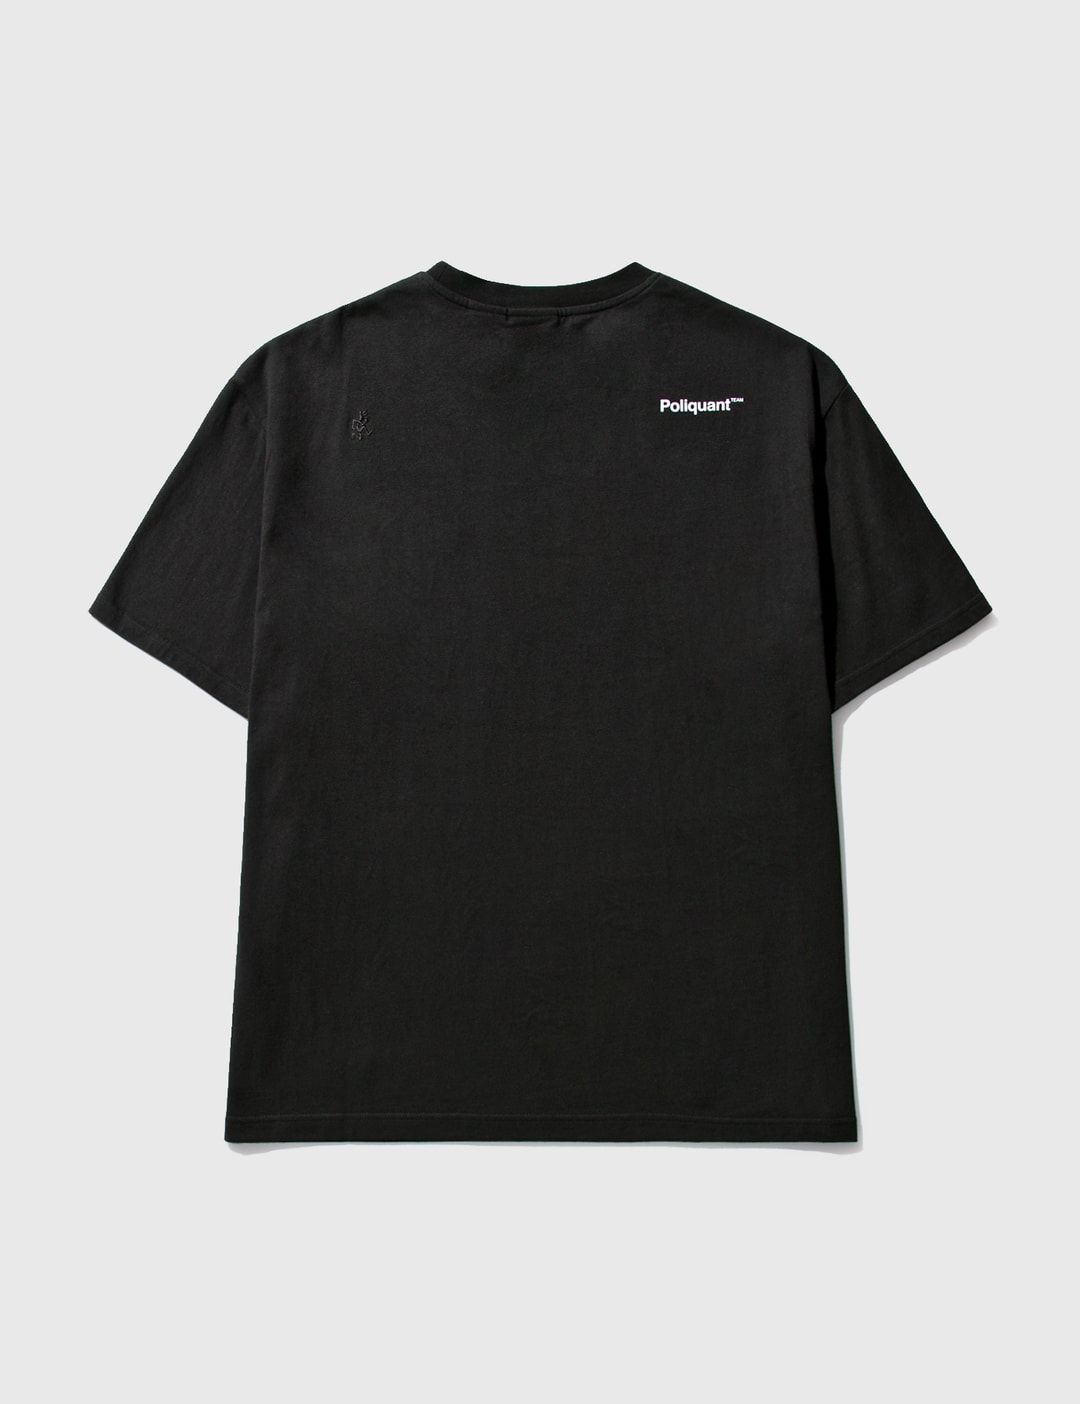 POLIQUANT - Poliquant x Gramicci GPG T-shirt | HBX - Globally Curated ...